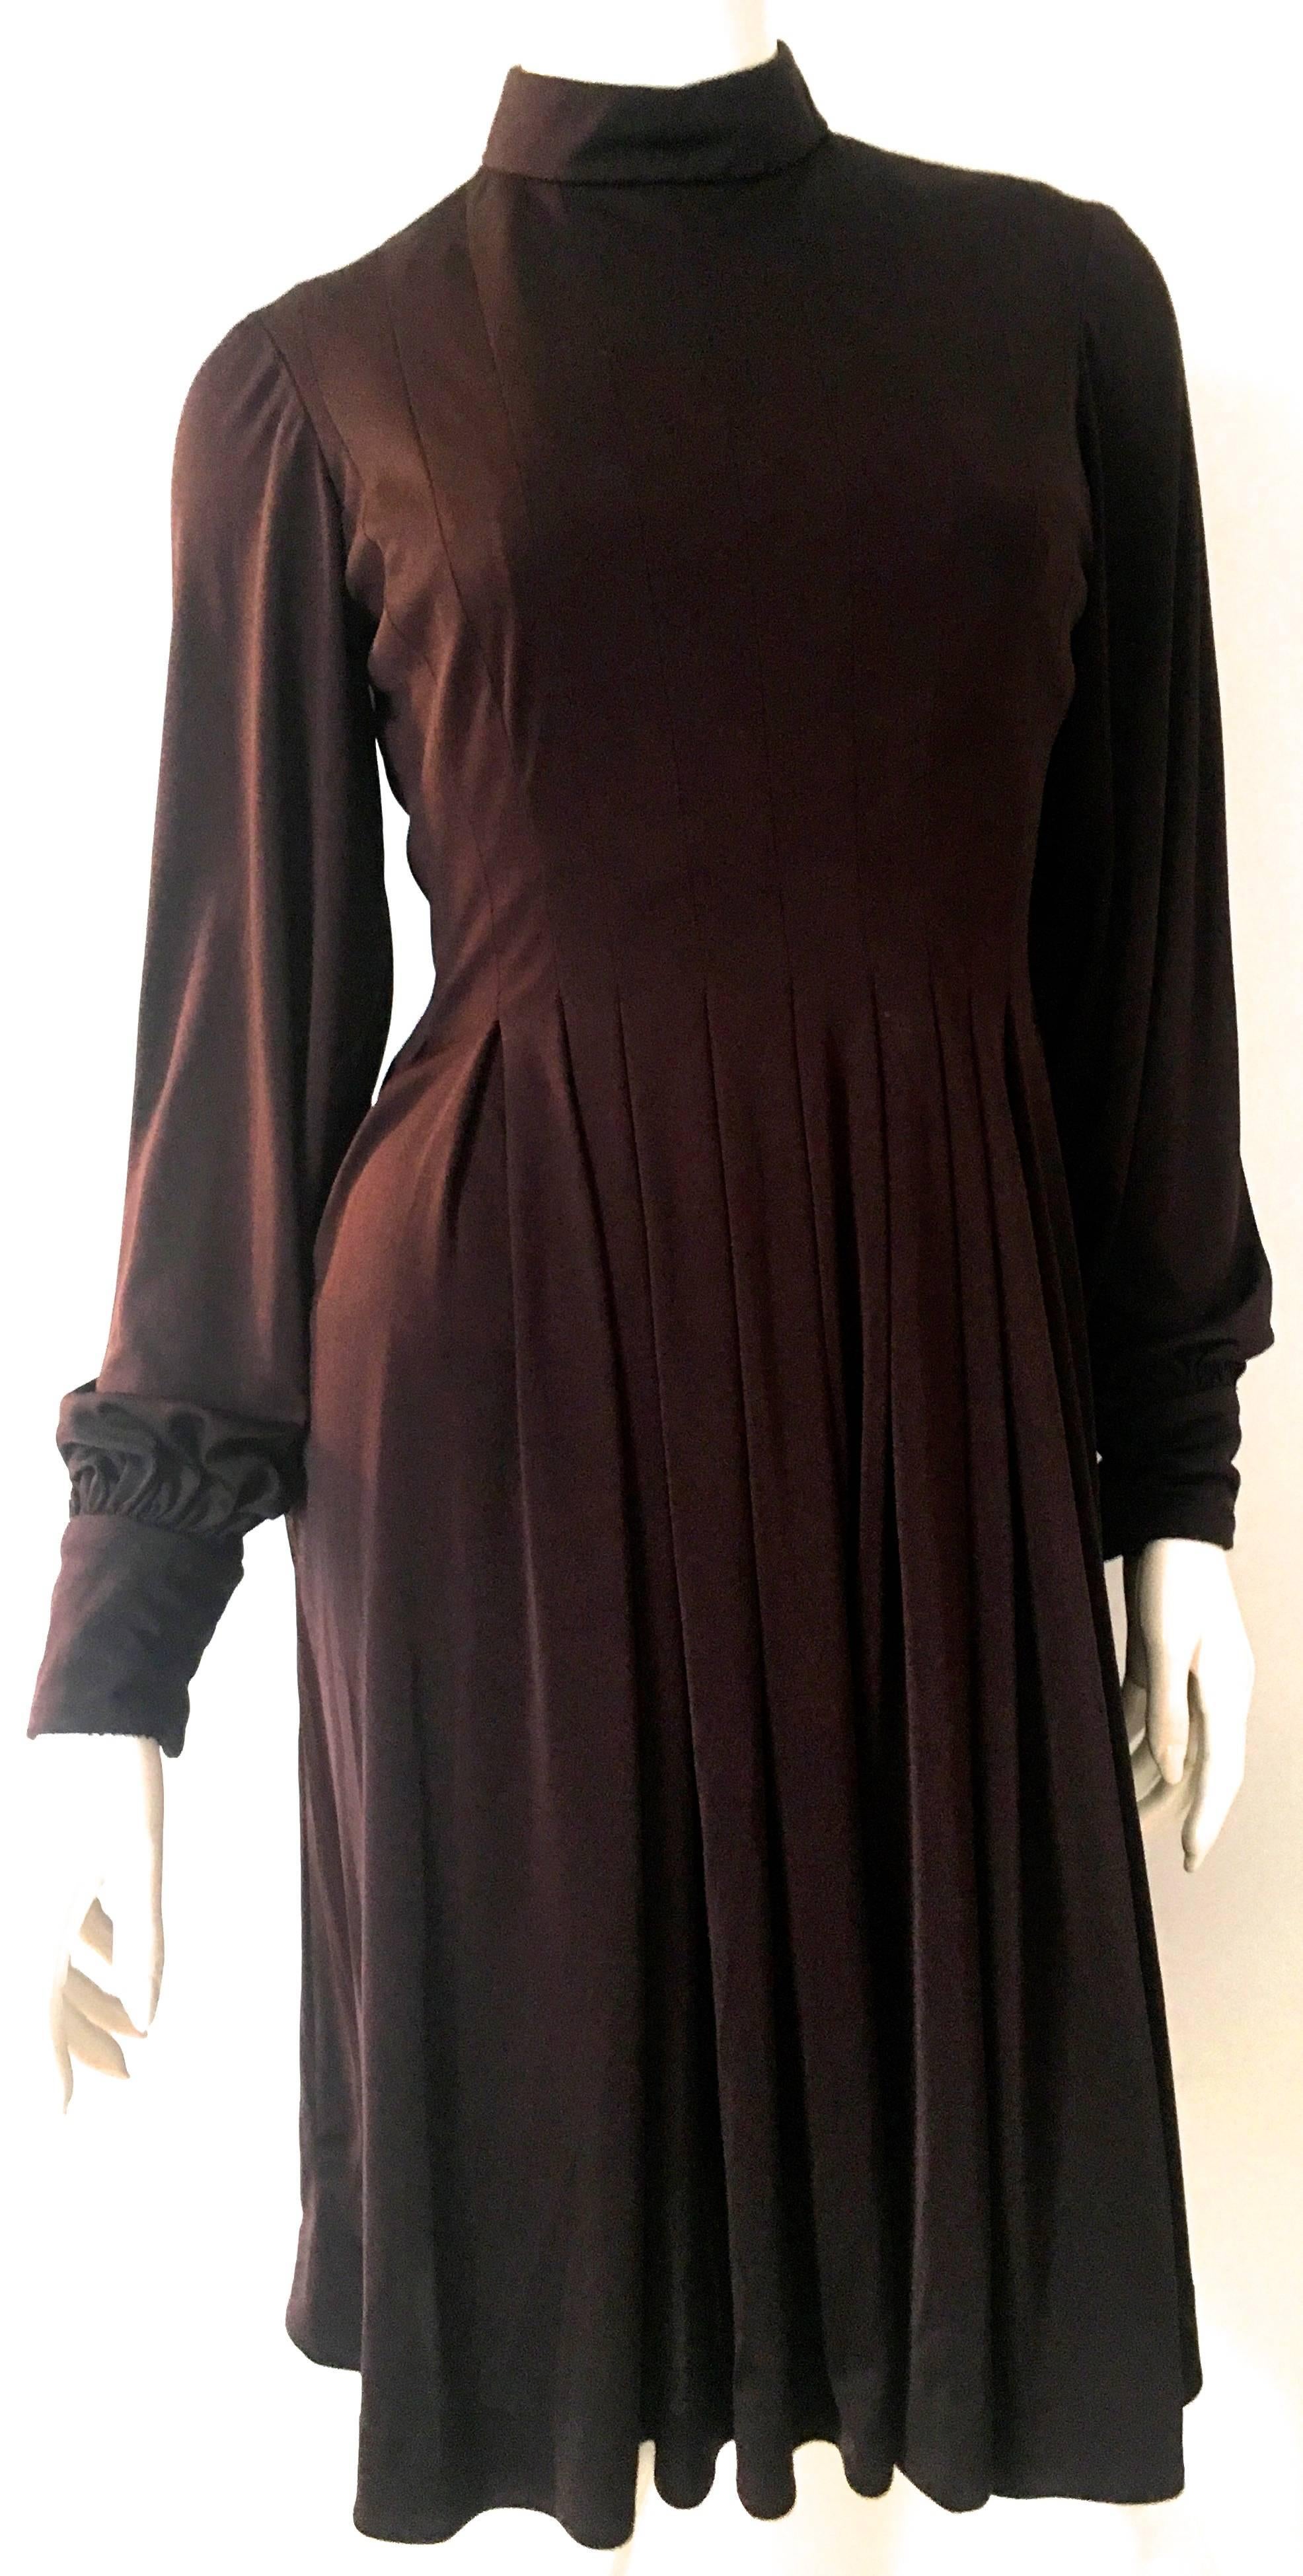 Presented here is a magnificent dress from Jean Louis. This fabulous dress is from the 1970's and is as gorgeous today as it was when it was first crafted. The brown dress is the perfect solution for a party or event that a suitable cocktail or